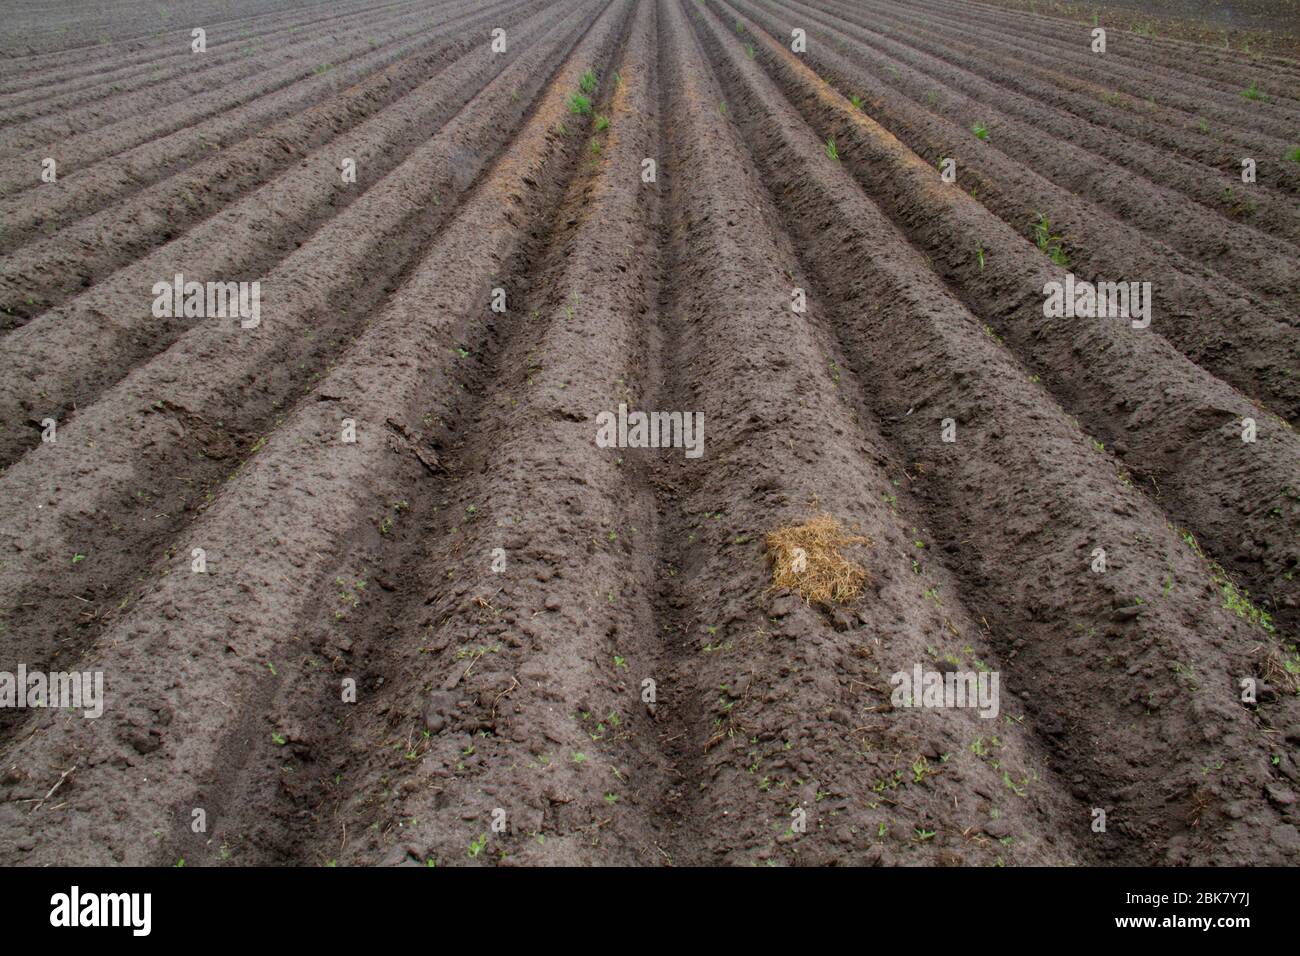 Pattern of ridges and furrows in a humic sandy field, prepared for cultivation of potatoes Stock Photo